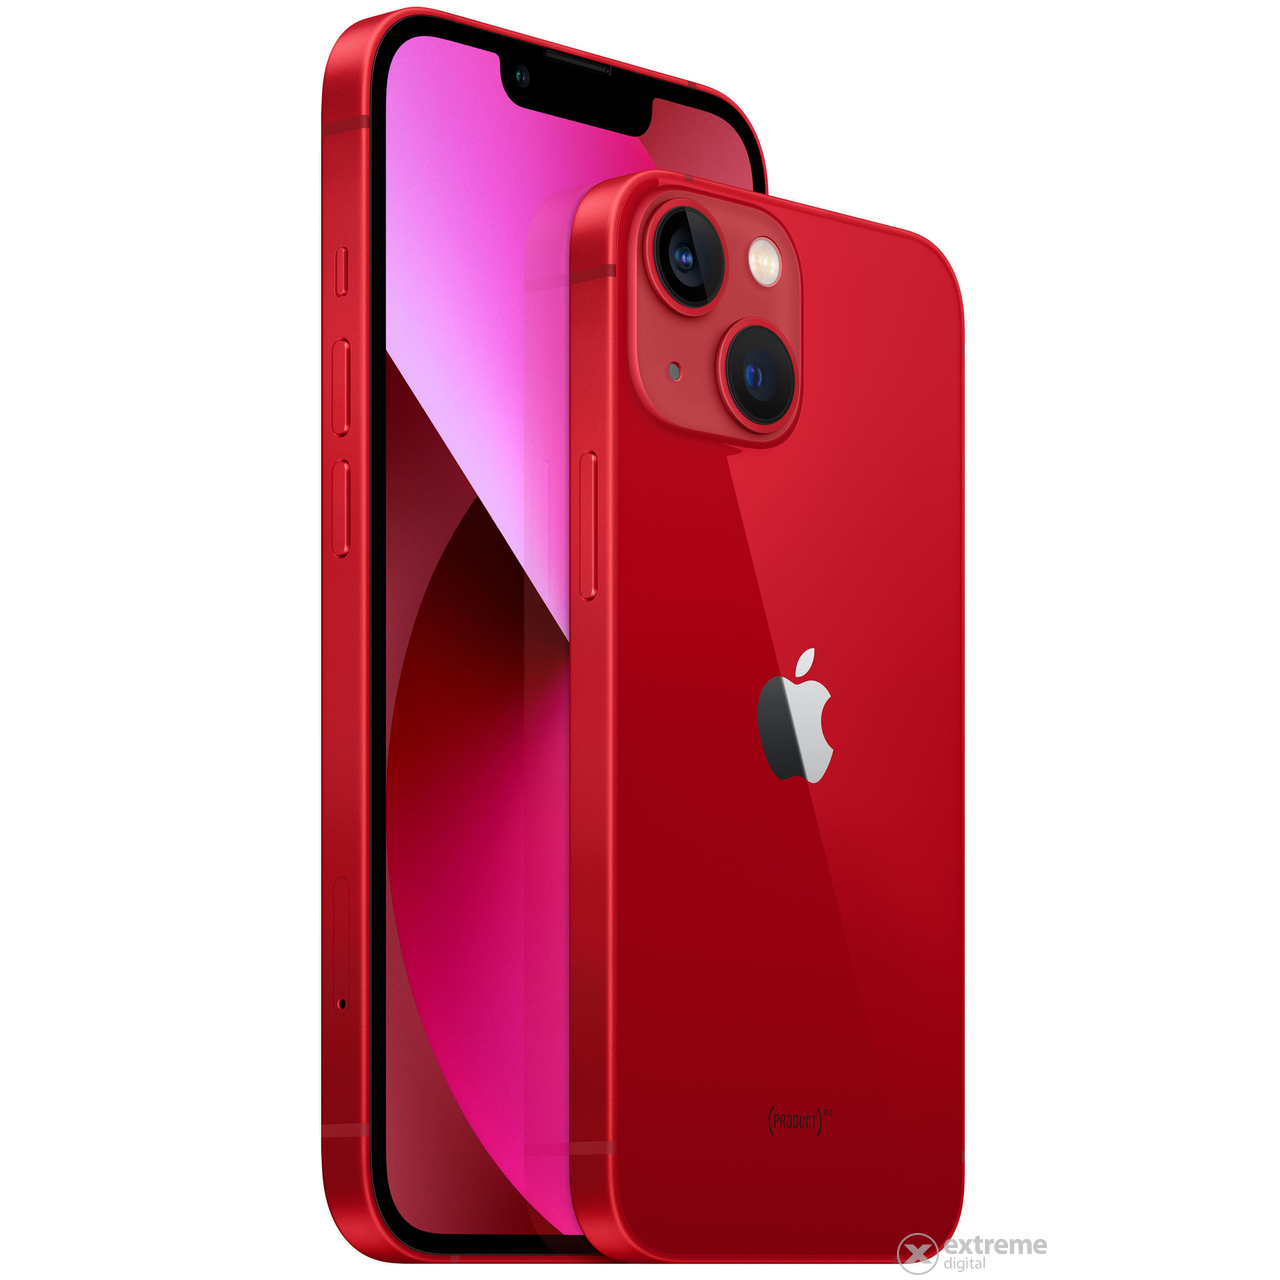 Apple iPhone 13 128GB (mlpj3hu/a), (PRODUCT) RED